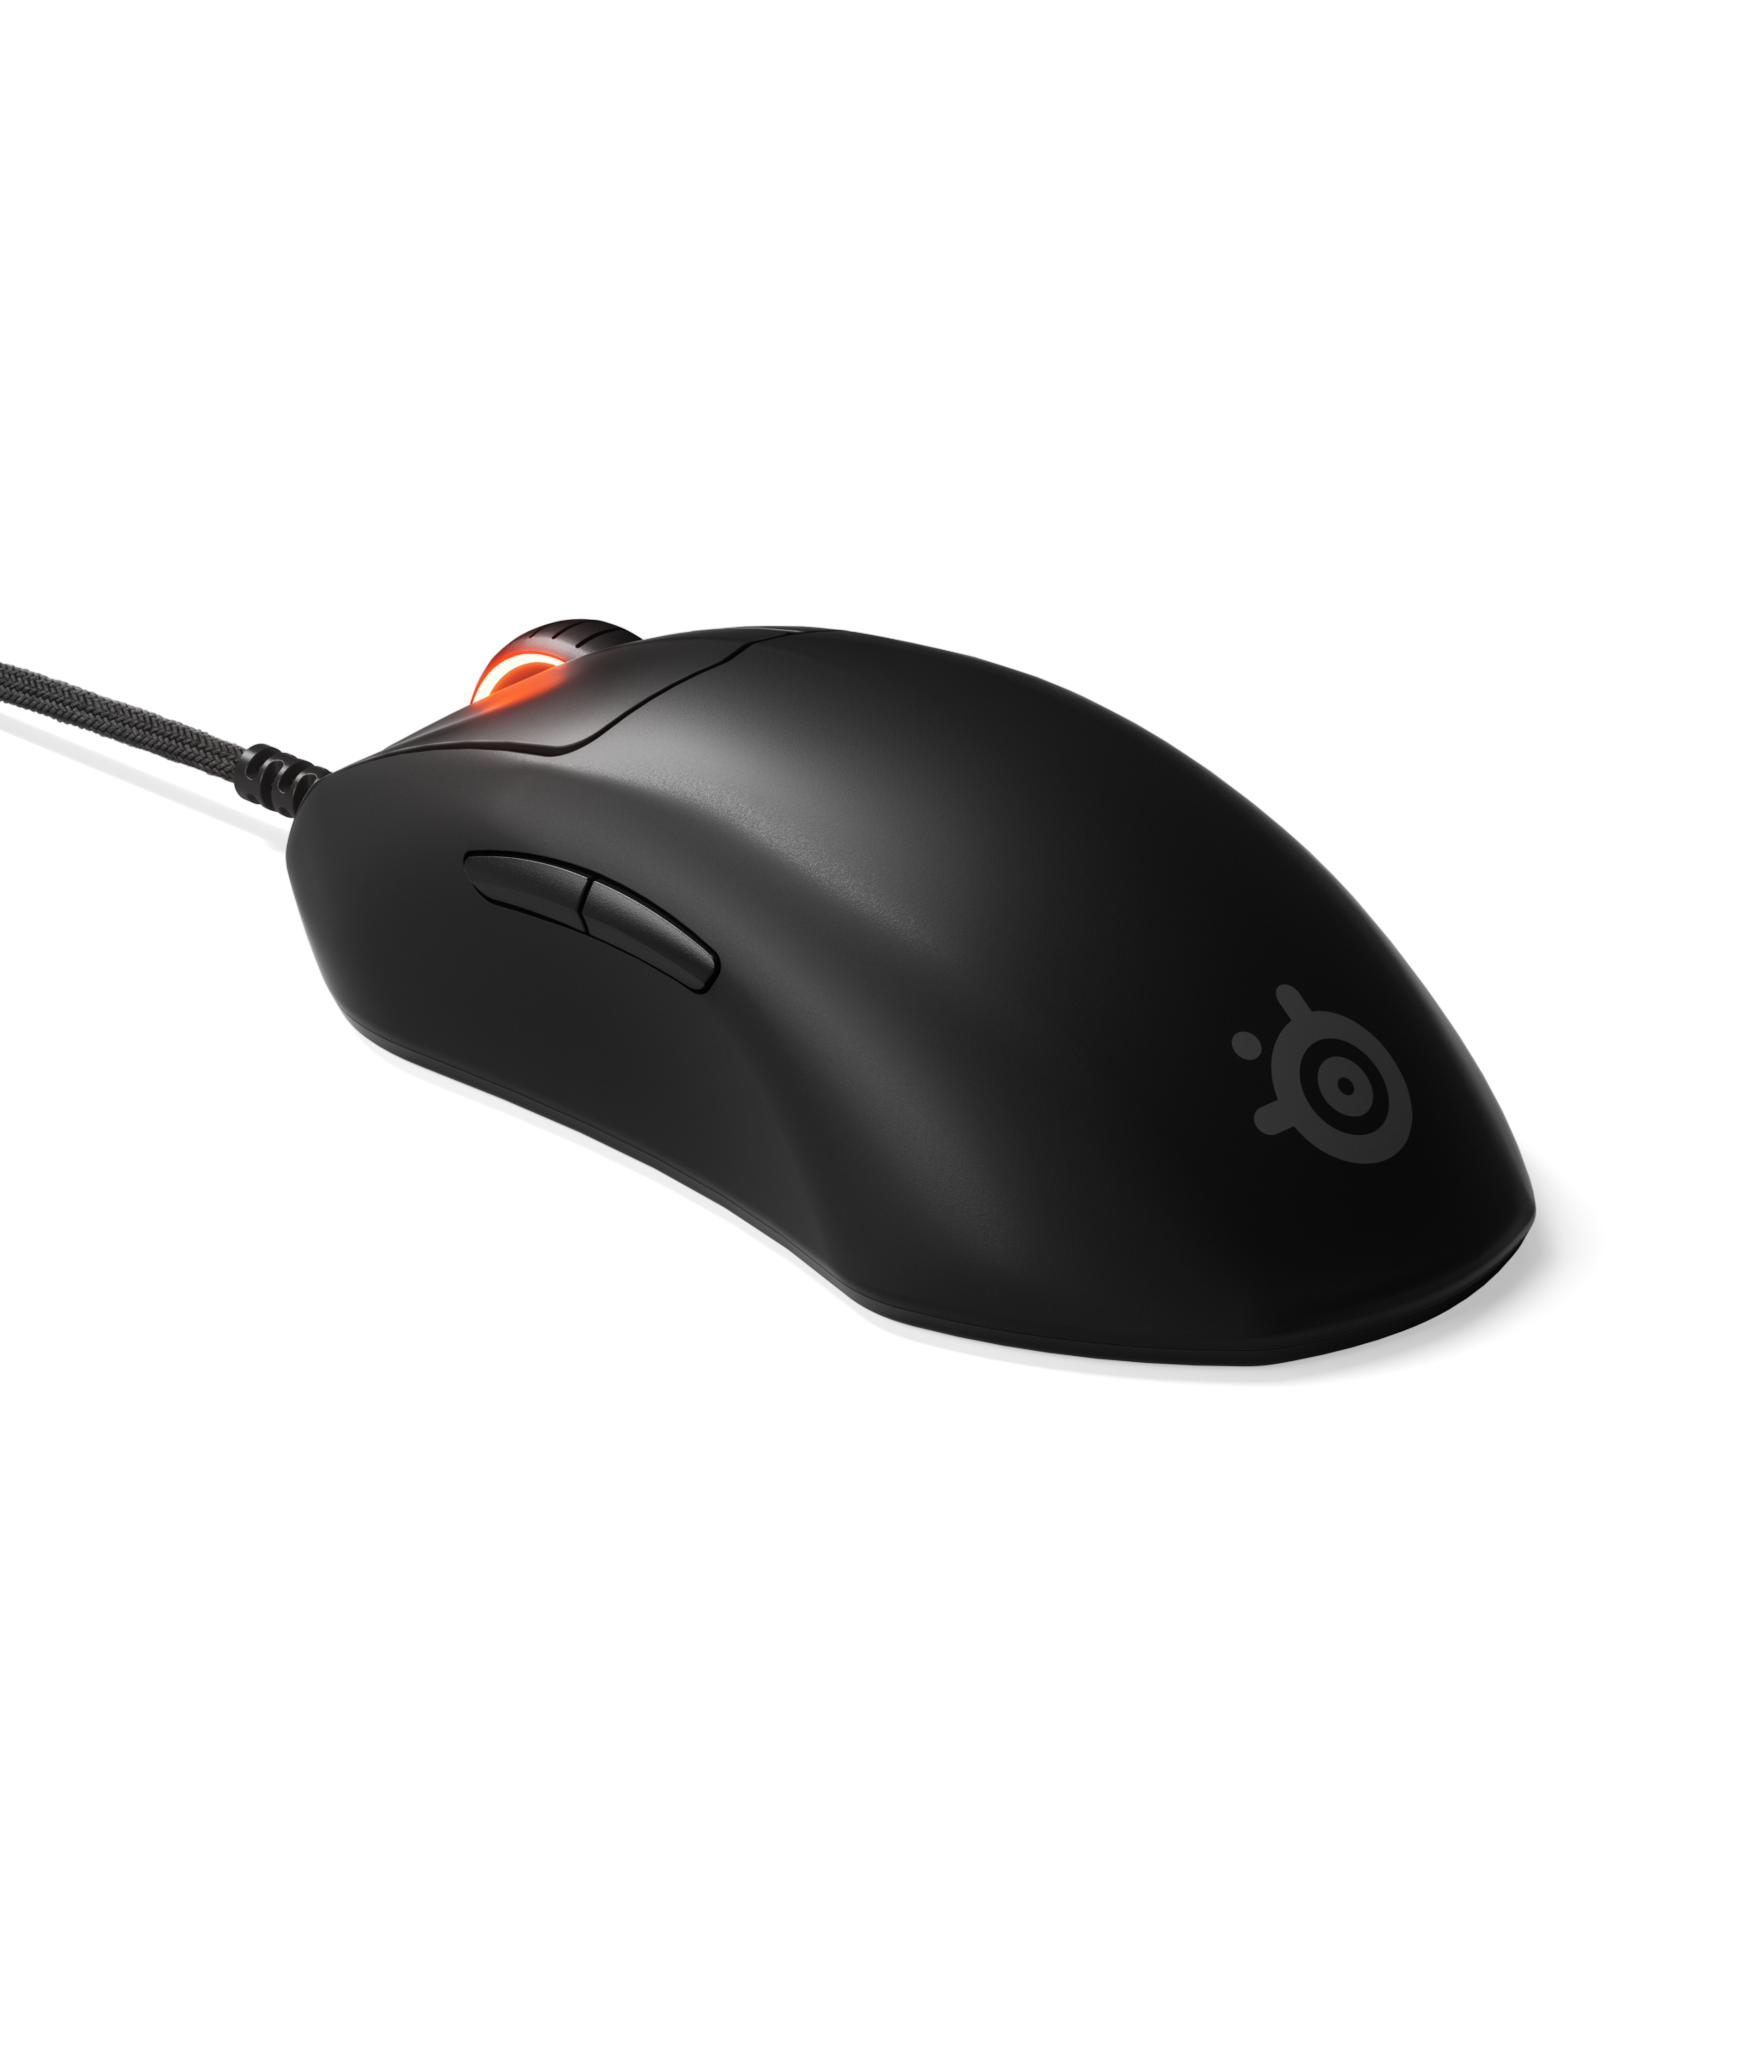 Steelseries - Prime+ Gaming Mouse